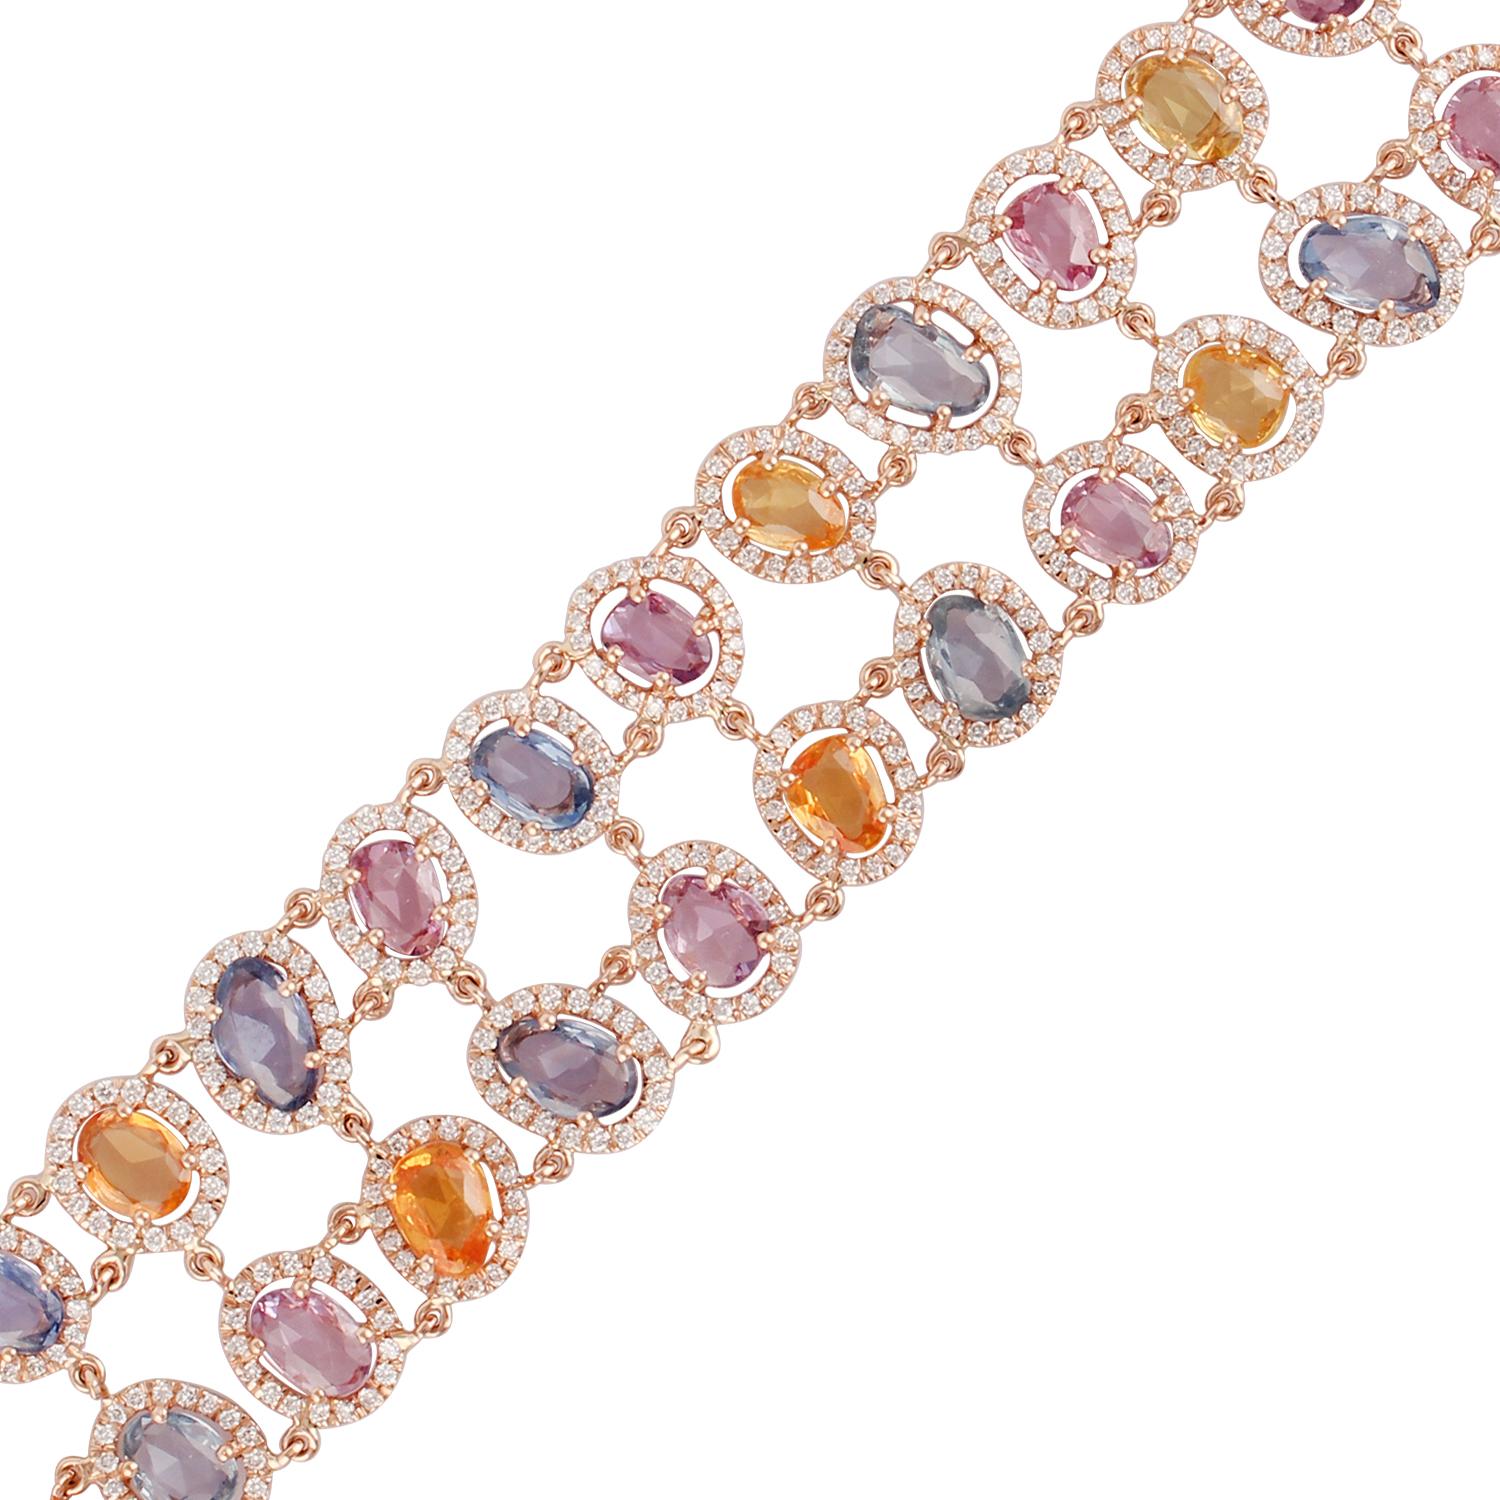 Full-cut Round Diamonds 3.70 carats
Multi-colored Rose-cut Uneven shaped Sapphires 19.65 carats
18 kt Rose gold 20.75 grams
The bracelet has an easy 'press and pull' lock mechanism for opening and also has safety clasp beneath the lock.
